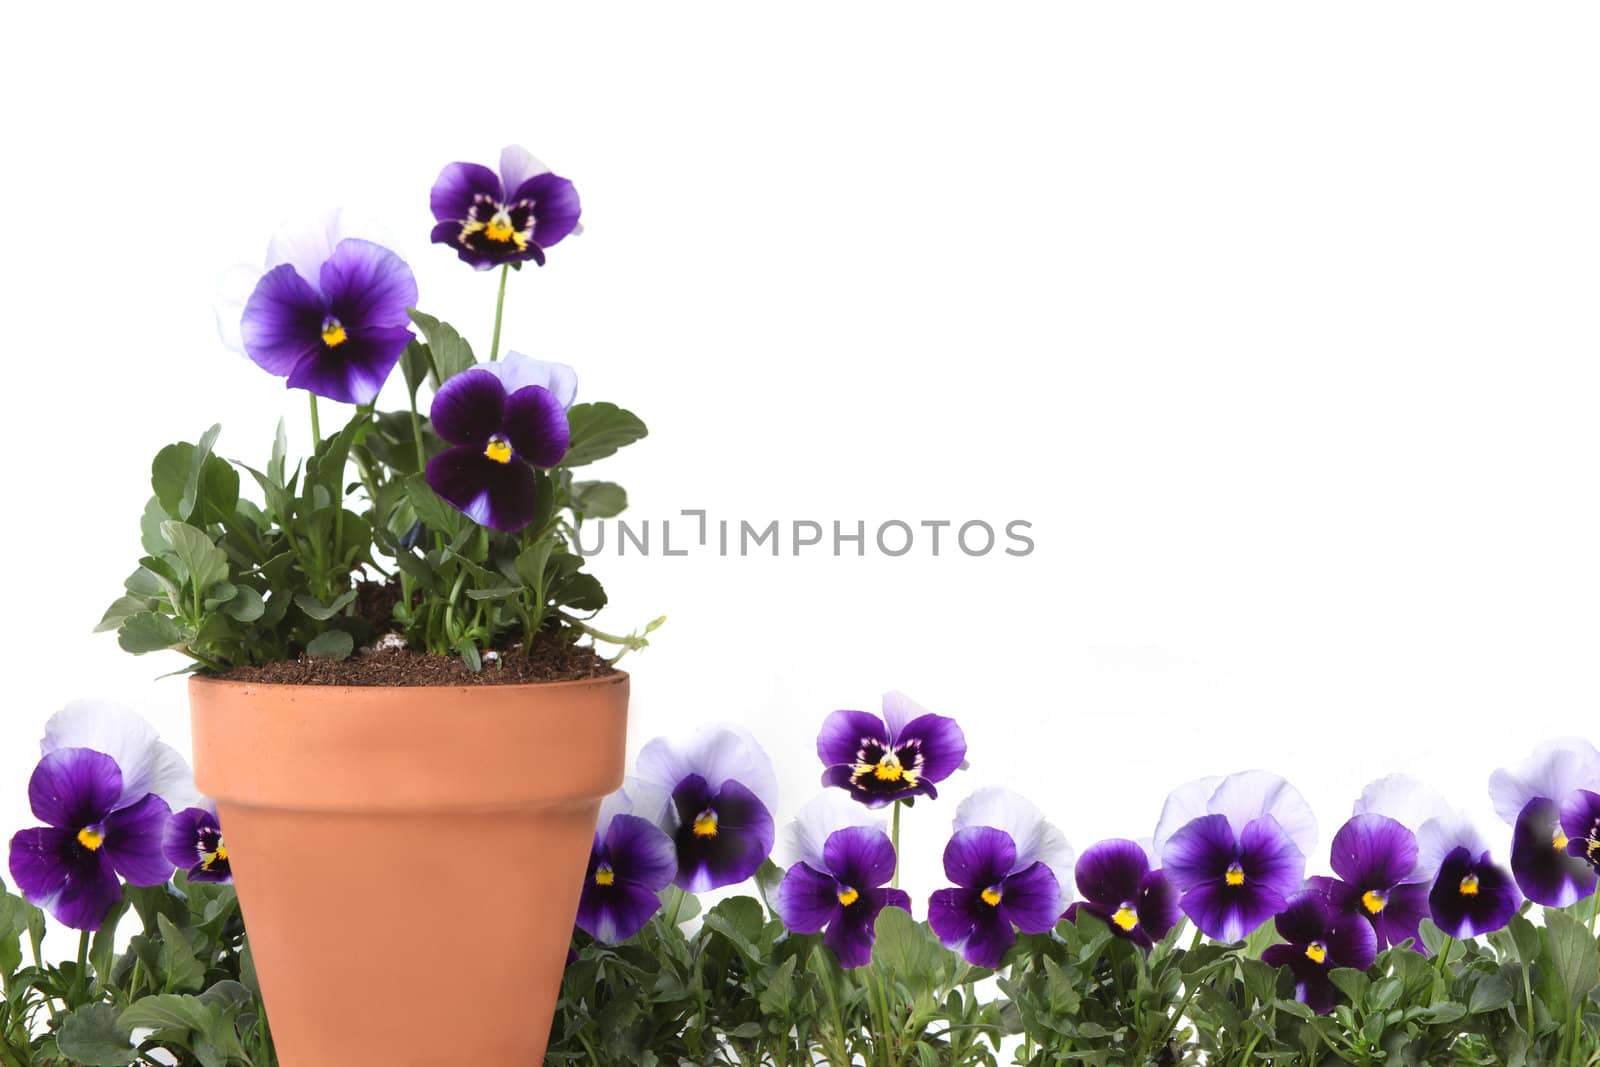 Pansies in a Row and in a Clay Pot Representing Springtime and Summer Gardening